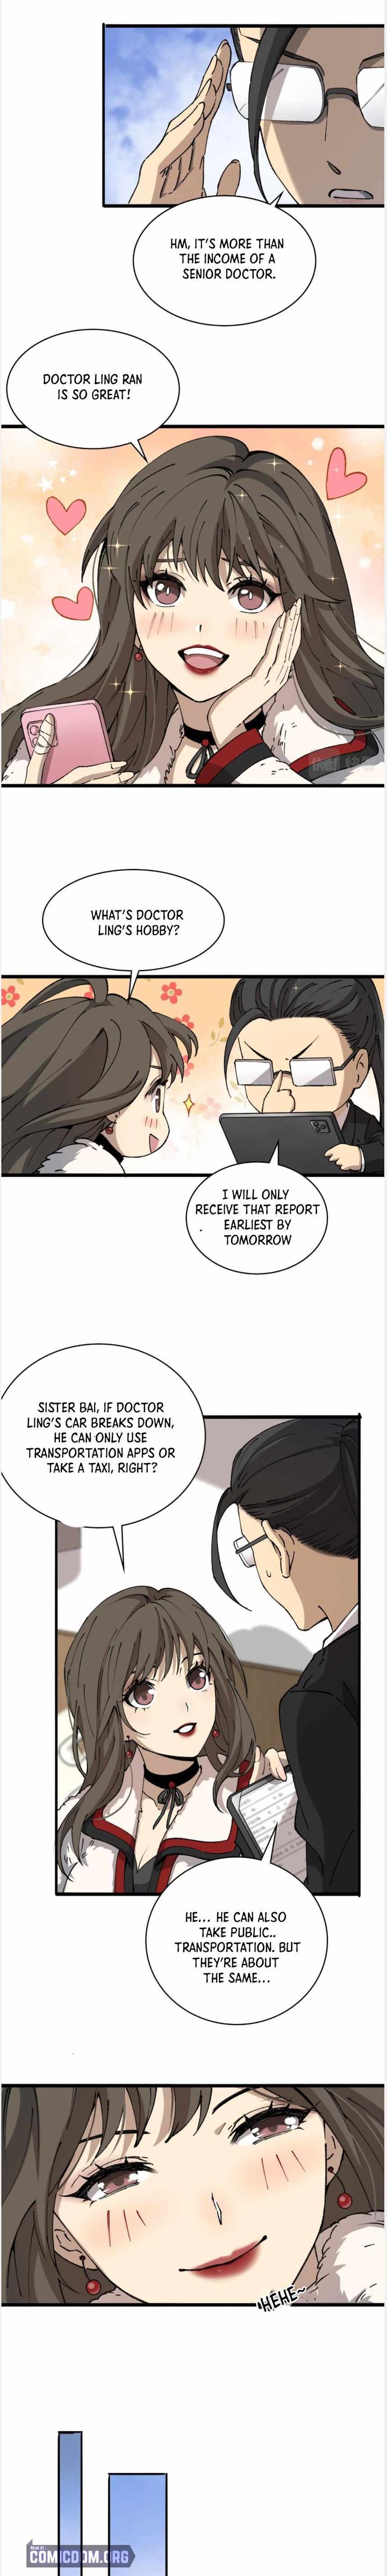 great_doctor_ling_ran_99_7